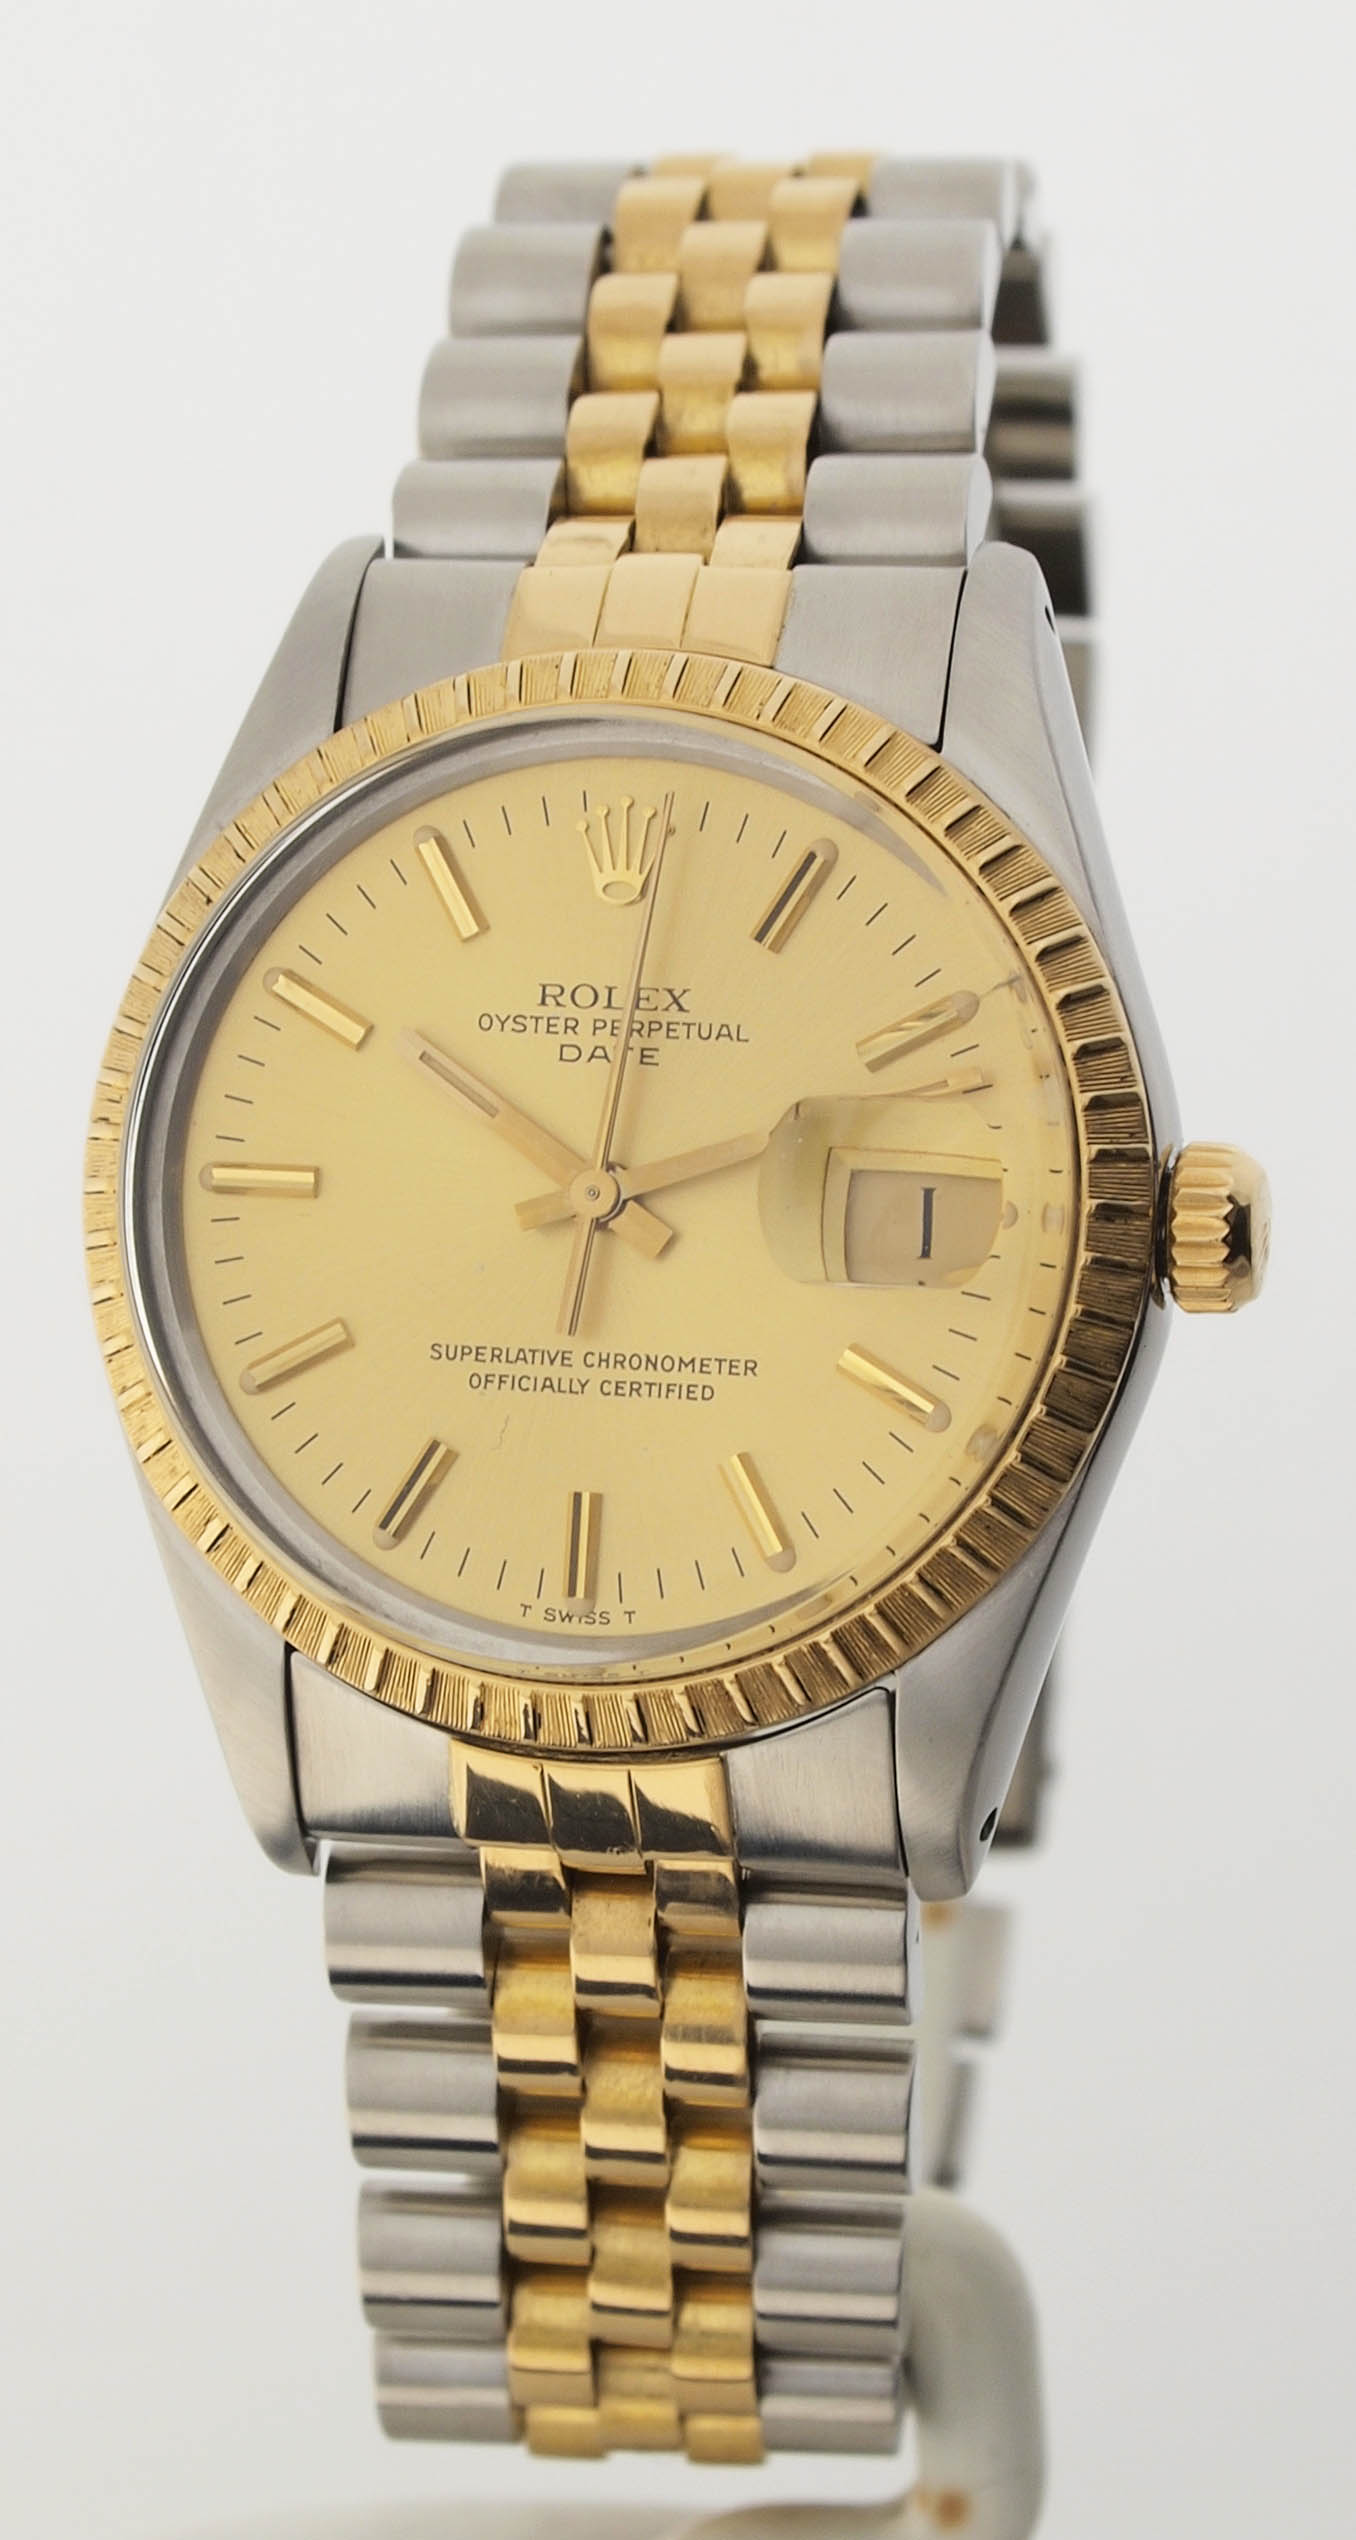 reloj rolex oyster perpetual datejust superlative chronometer officially certified